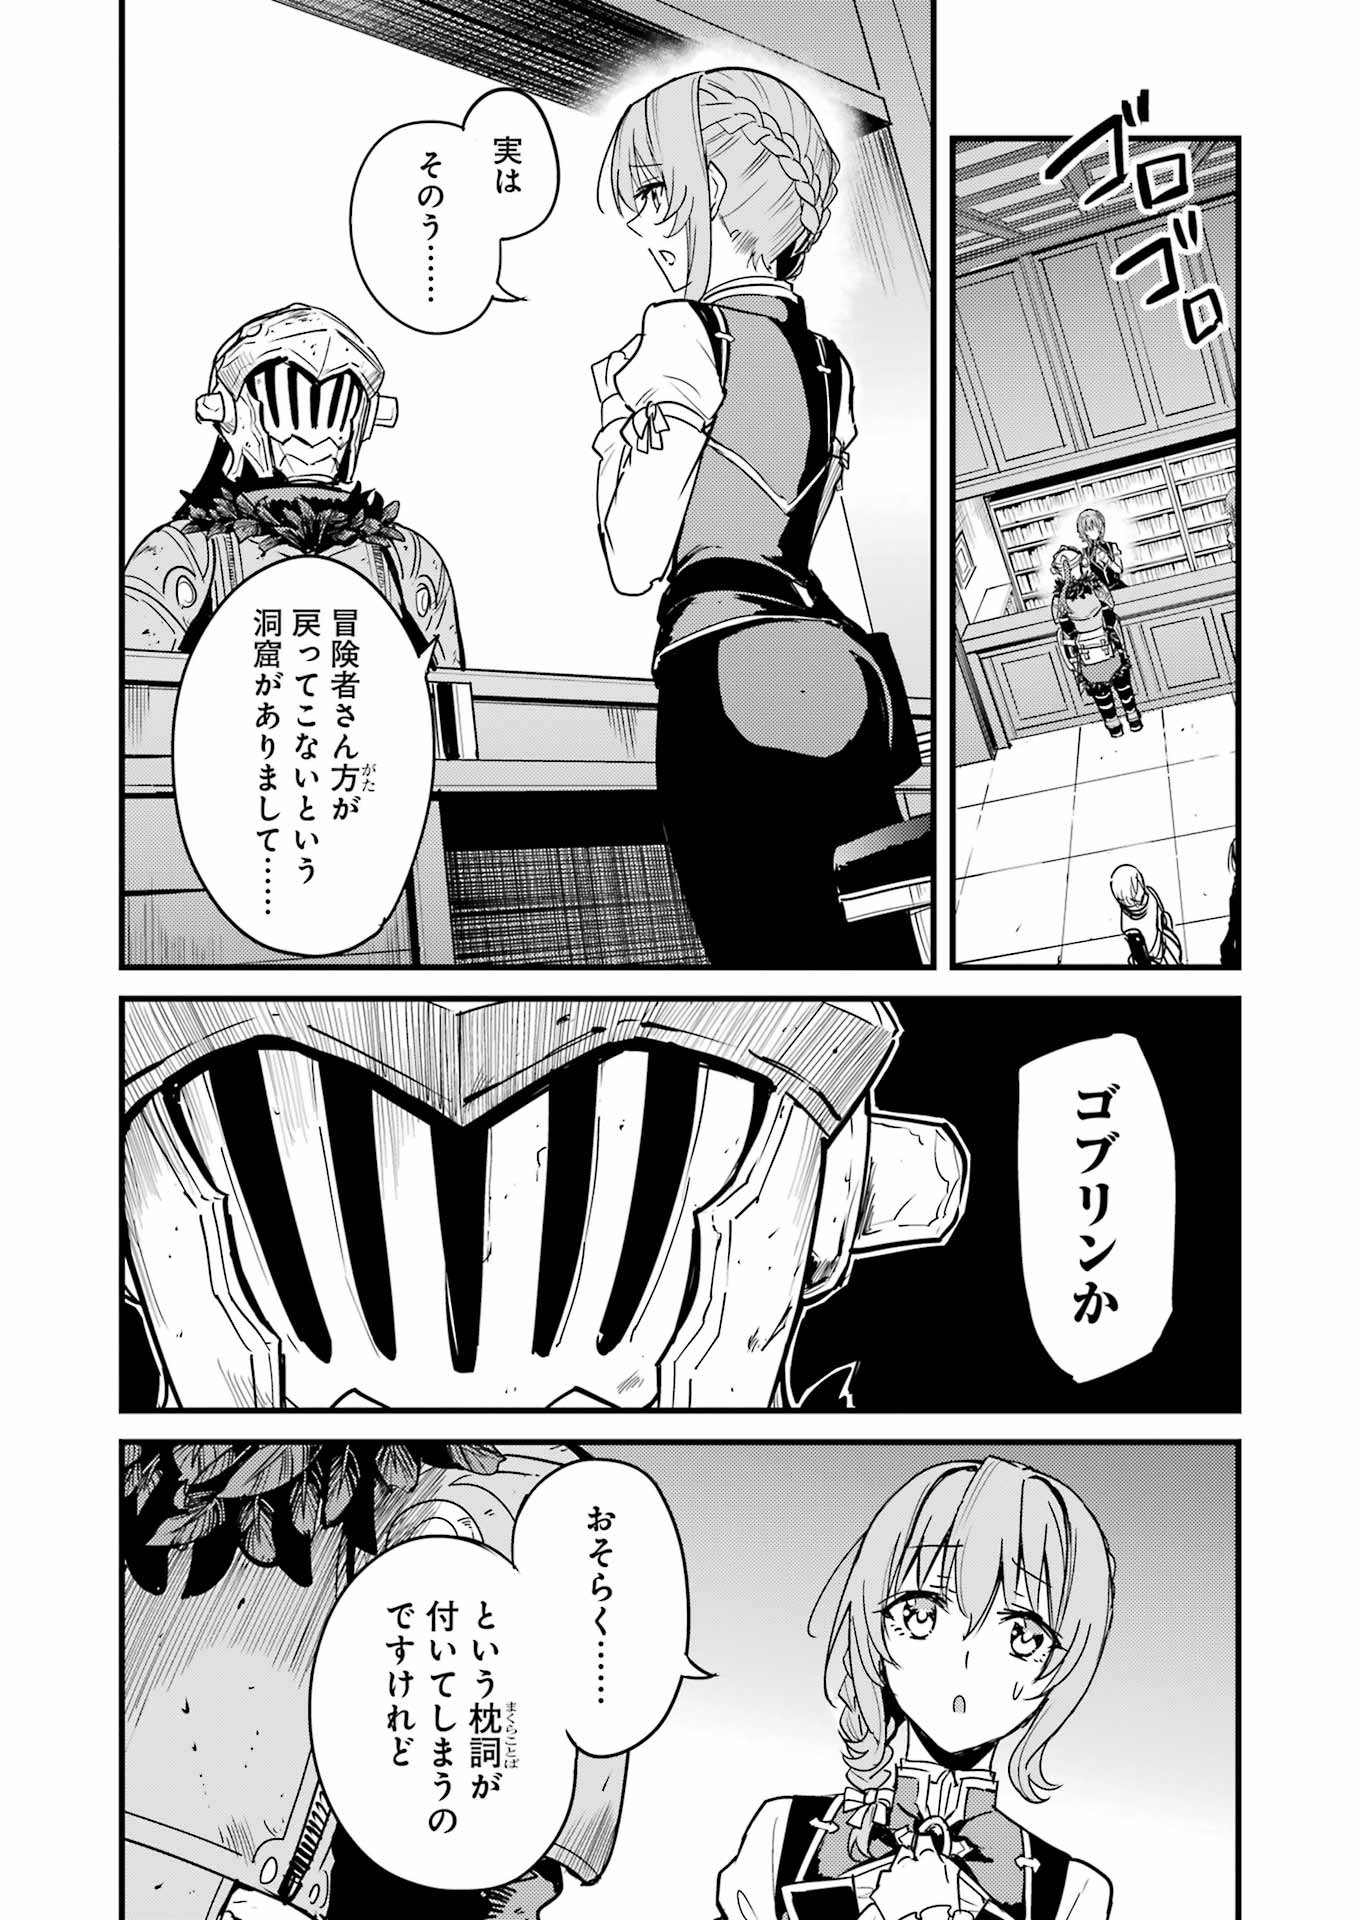 Goblin Slayer: Side Story Year One - Chapter 95 - Page 14